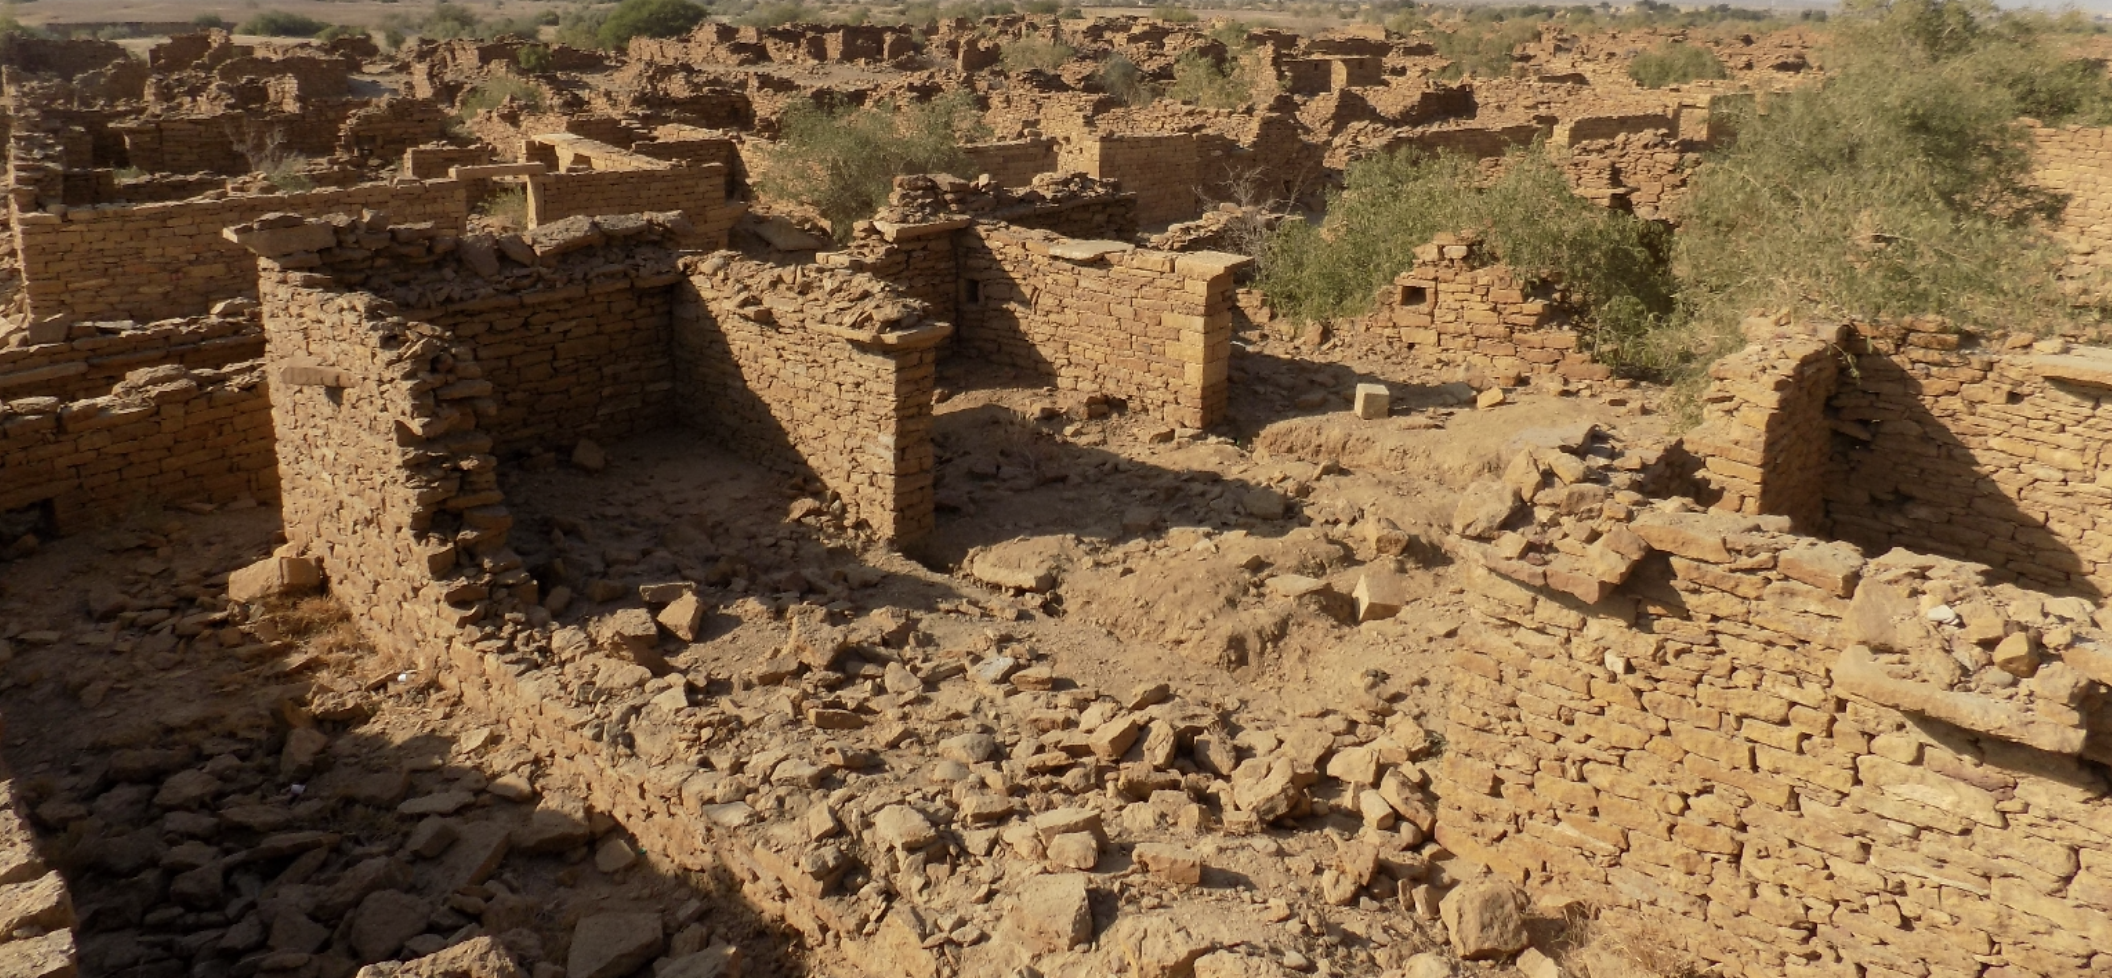 A photograph showing the ruins of Kuldhara. Wikimedia Commons.